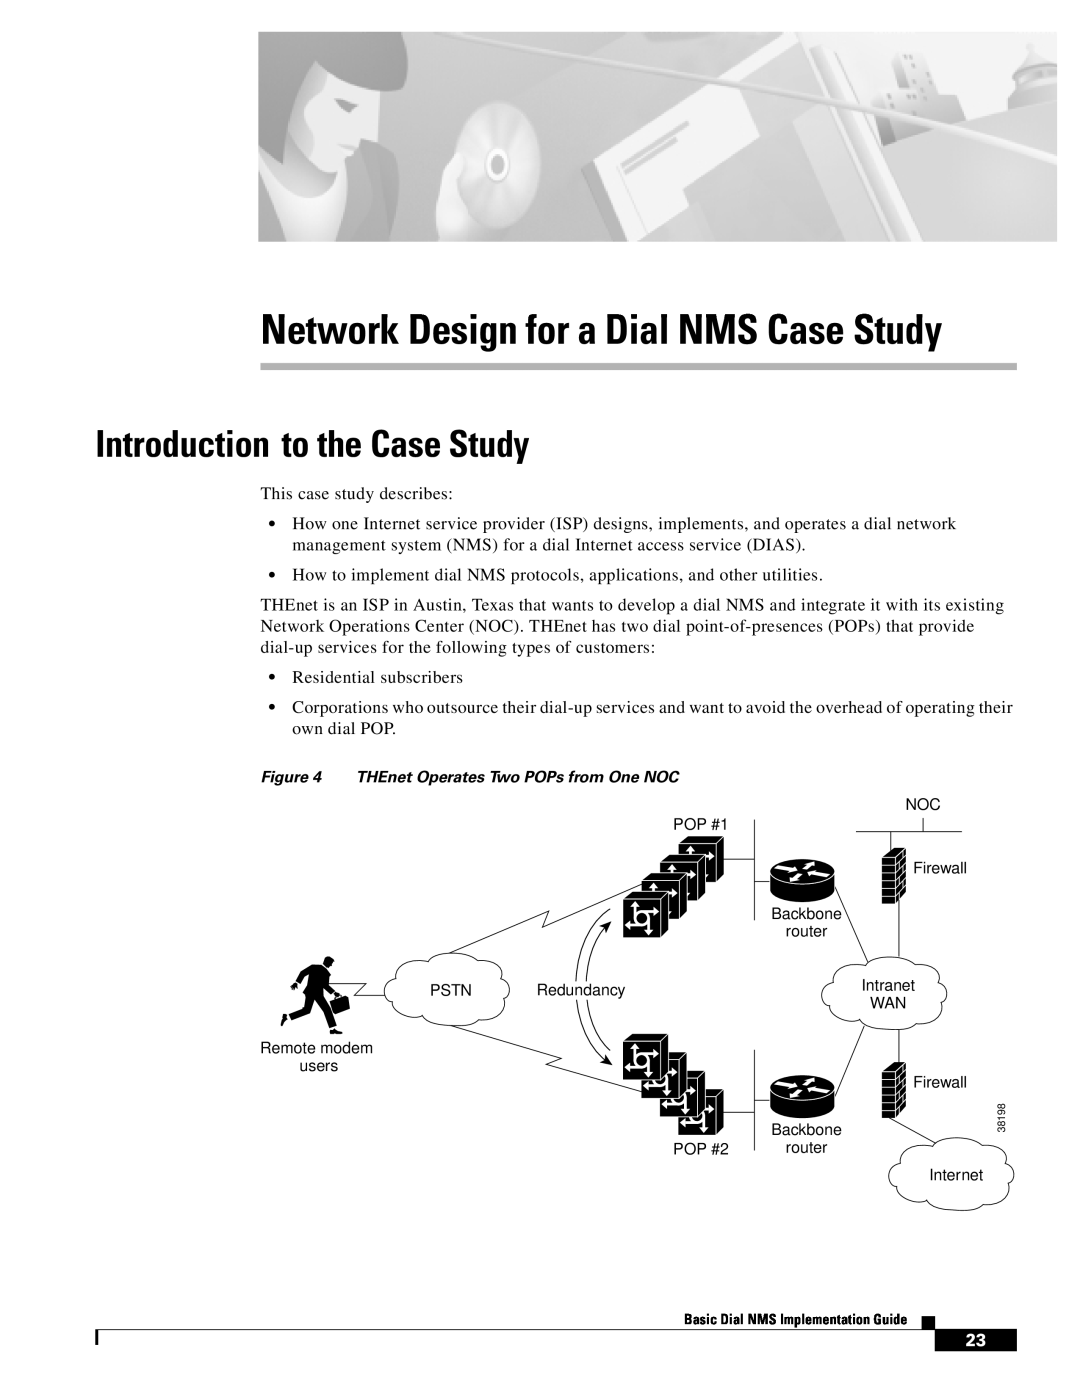 Cisco Systems manual Network Design for a Dial NMS Case Study, Introduction to the Case Study 